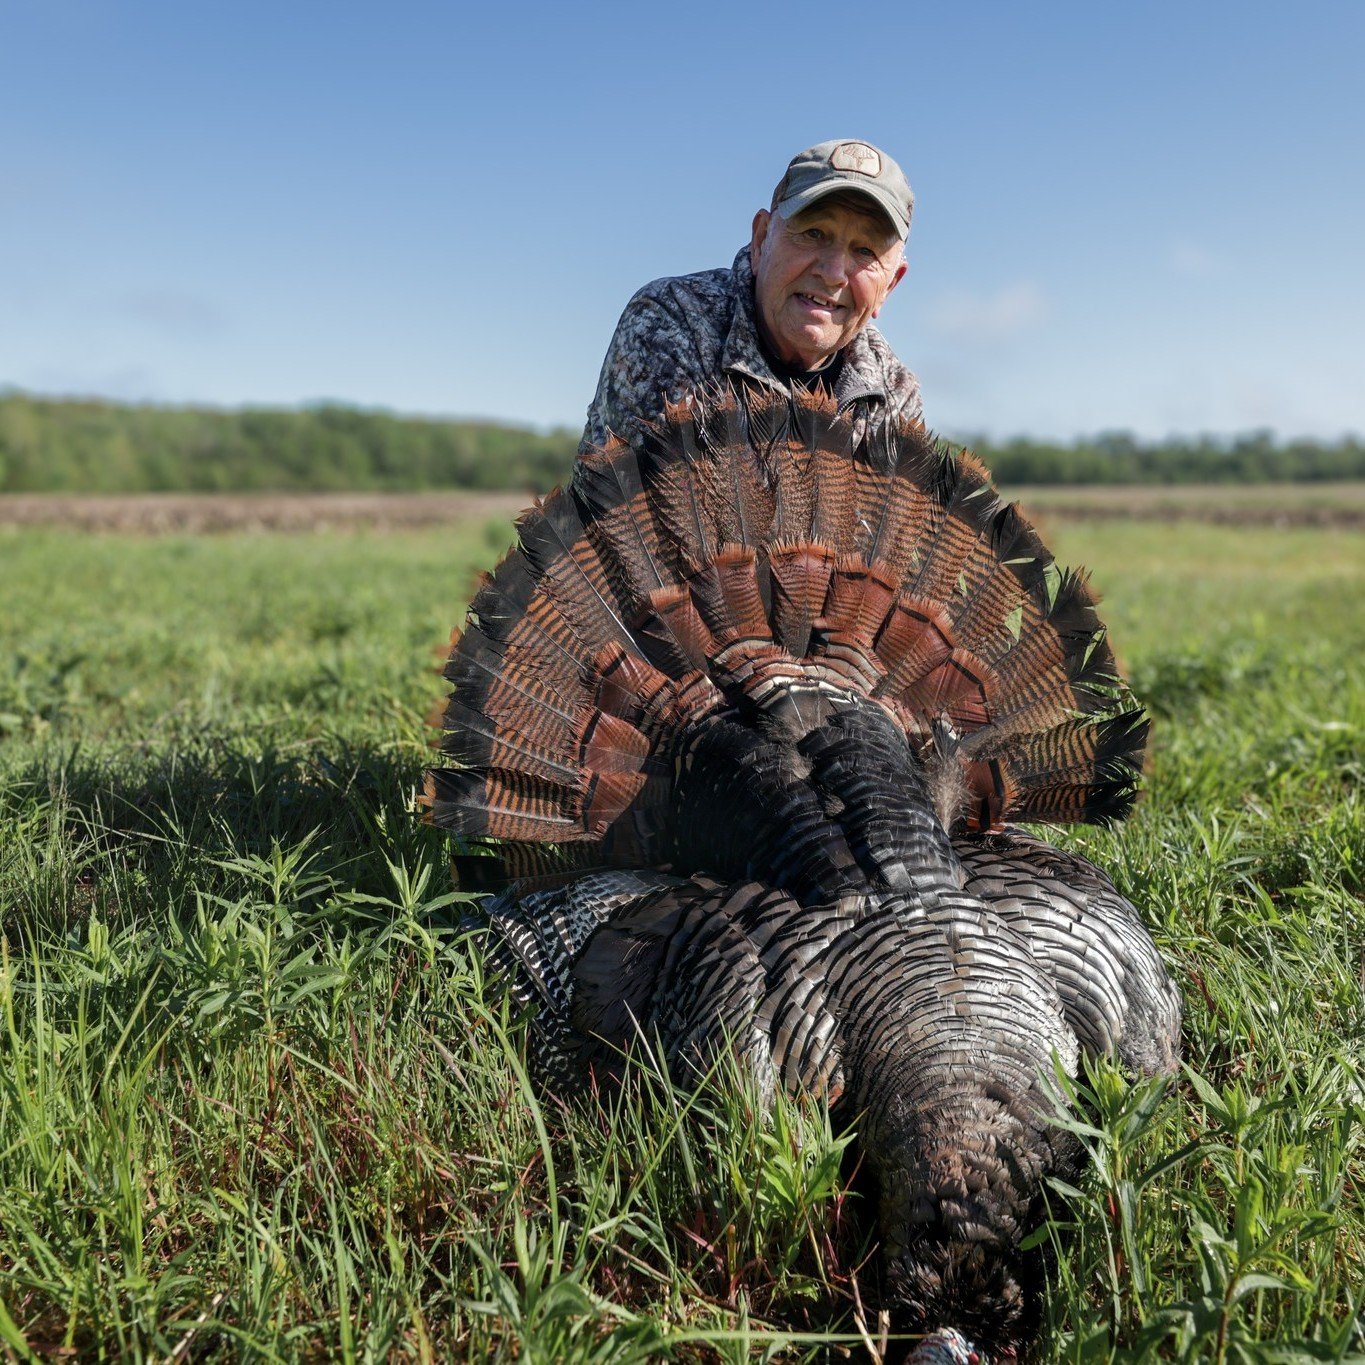 At 78 Years Young Charlie was able to take a big Ol Tom with his grandson (me kyle). It may have taken 6 different hunts, 4 opportunities, and 2 misses, but it all came together in an epic show after the fog melted off this morning. This Turkey means